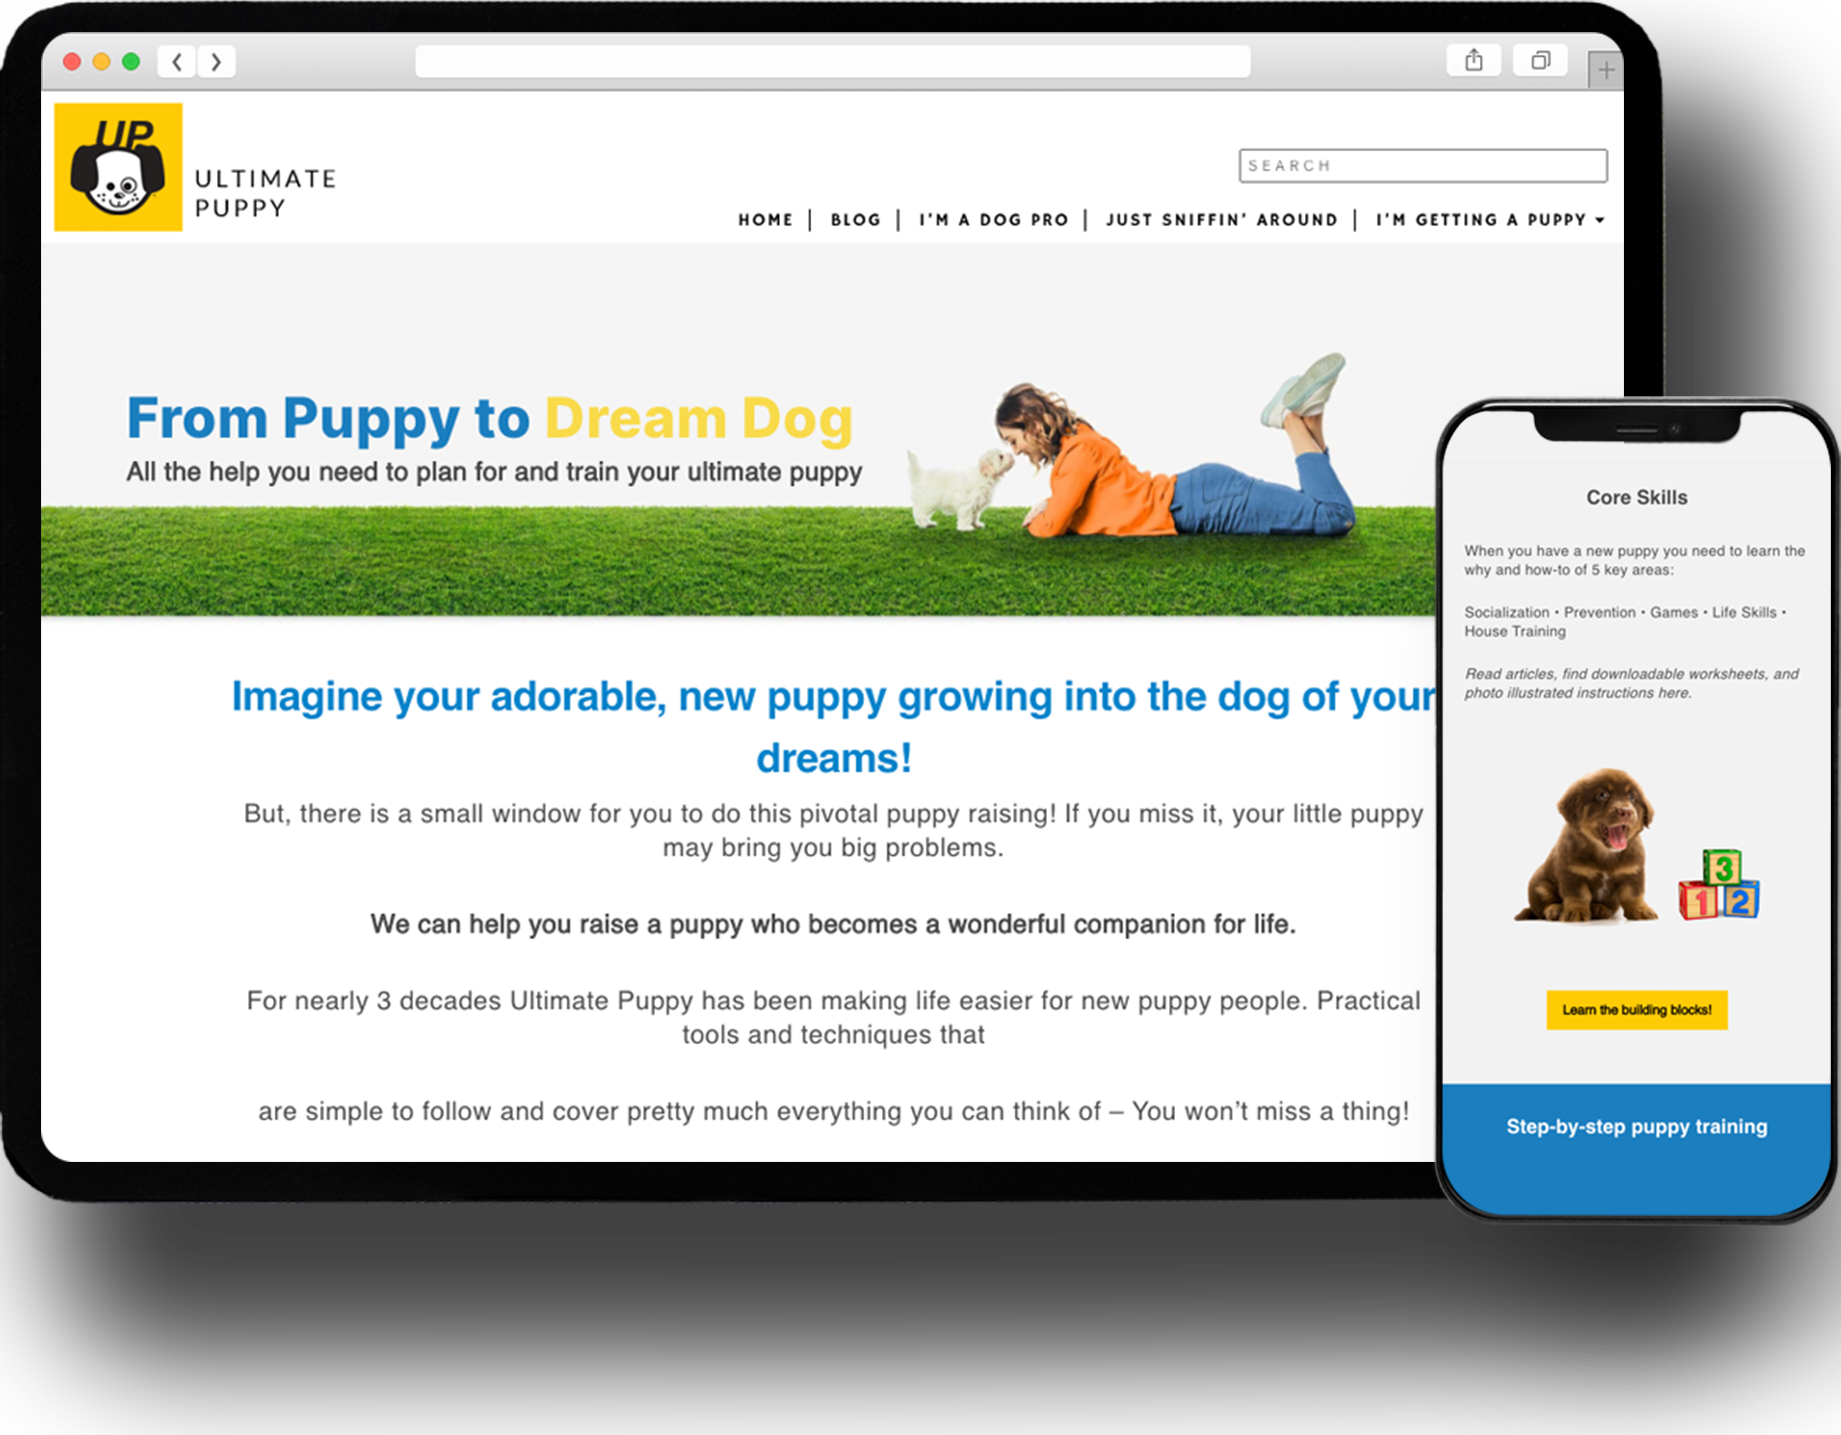 Screenshot of a dog training website called Ultimate Puppy on desktop and mobile devices